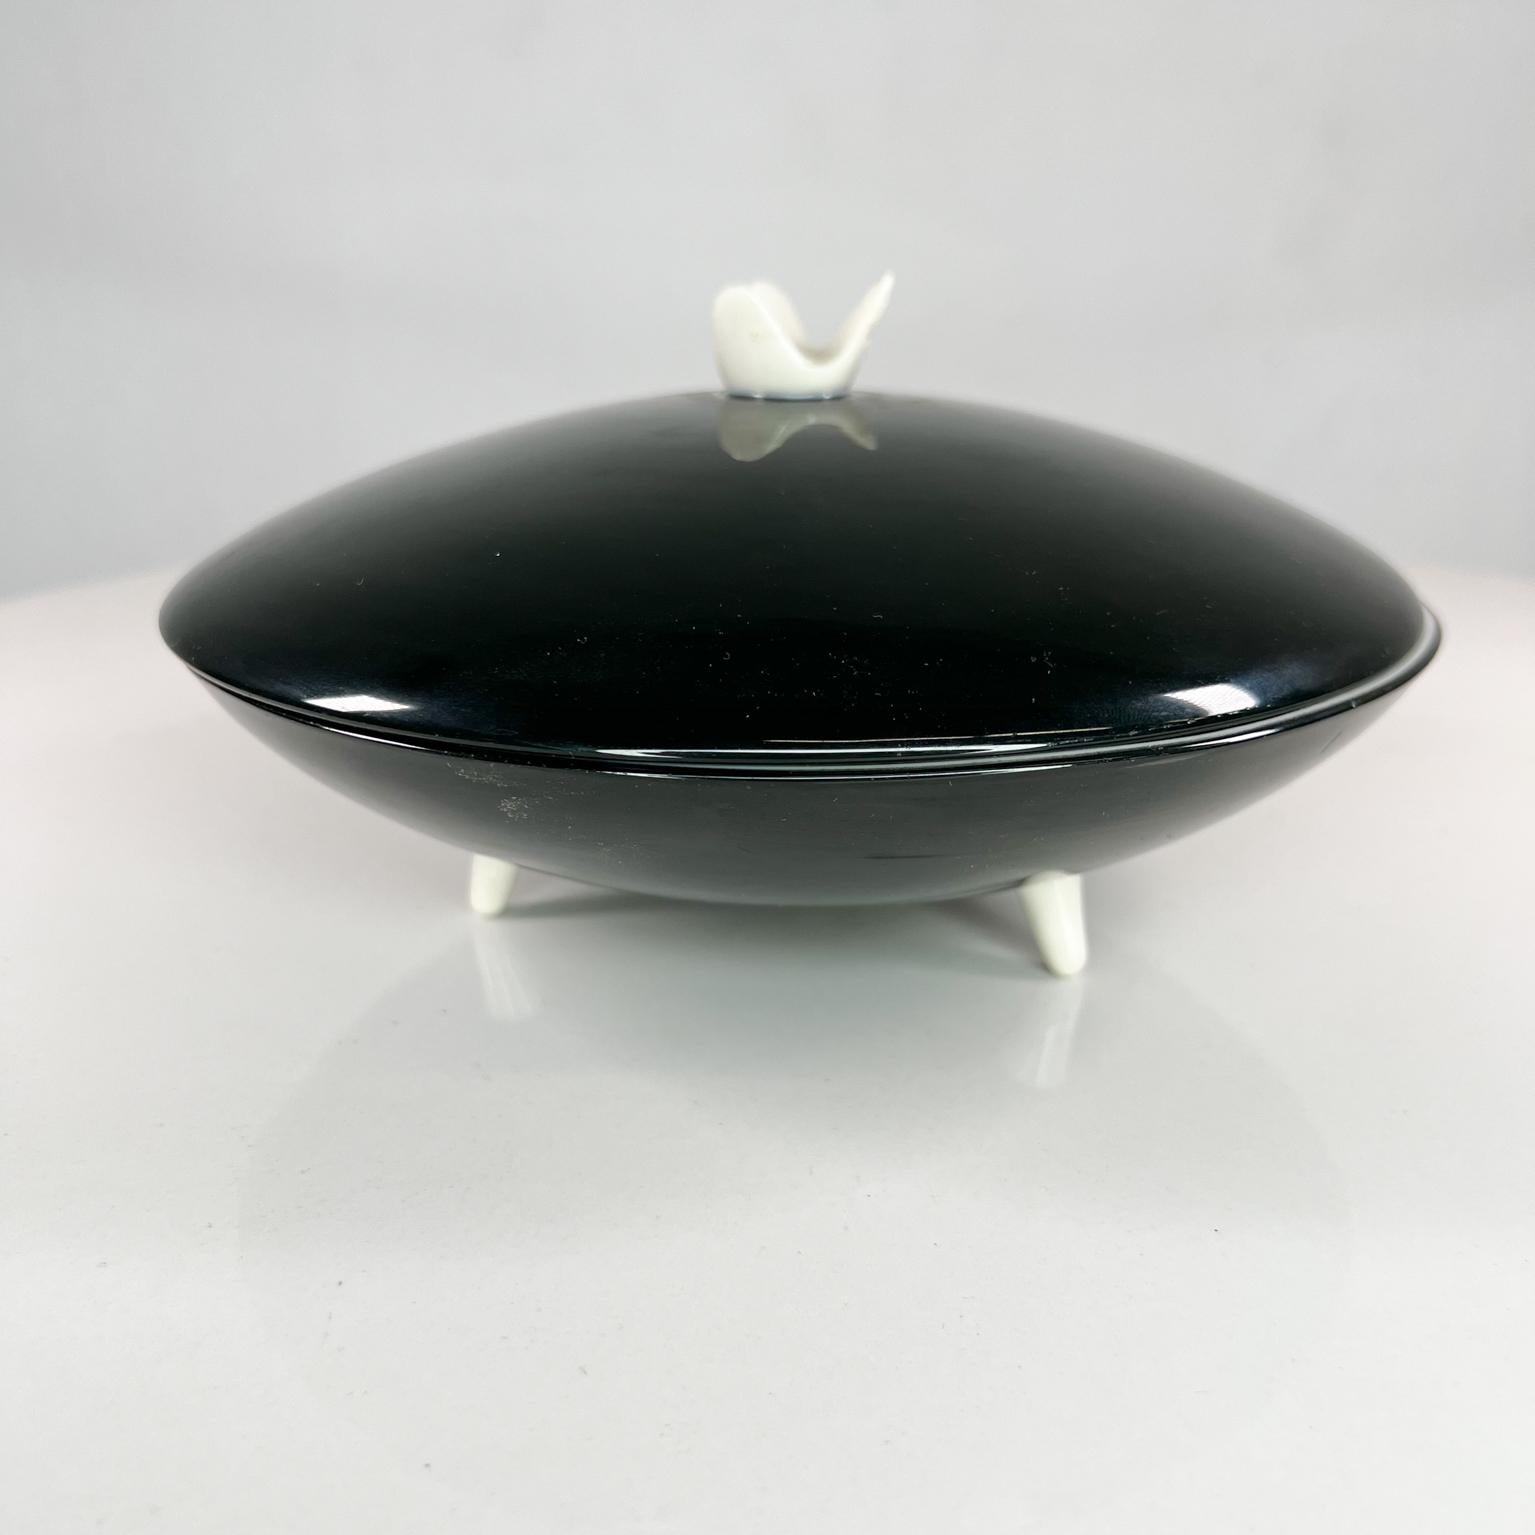 1950s Modernism Contours art ware covered candy dish footed black & white.
Franciscan Fine China Gladding McBean & Co
Contours Art Ware 1955 Masterpiece China
Maker stamped
Measurs: 7.75 diameter x 4 tall.
Preowned original vintage condition